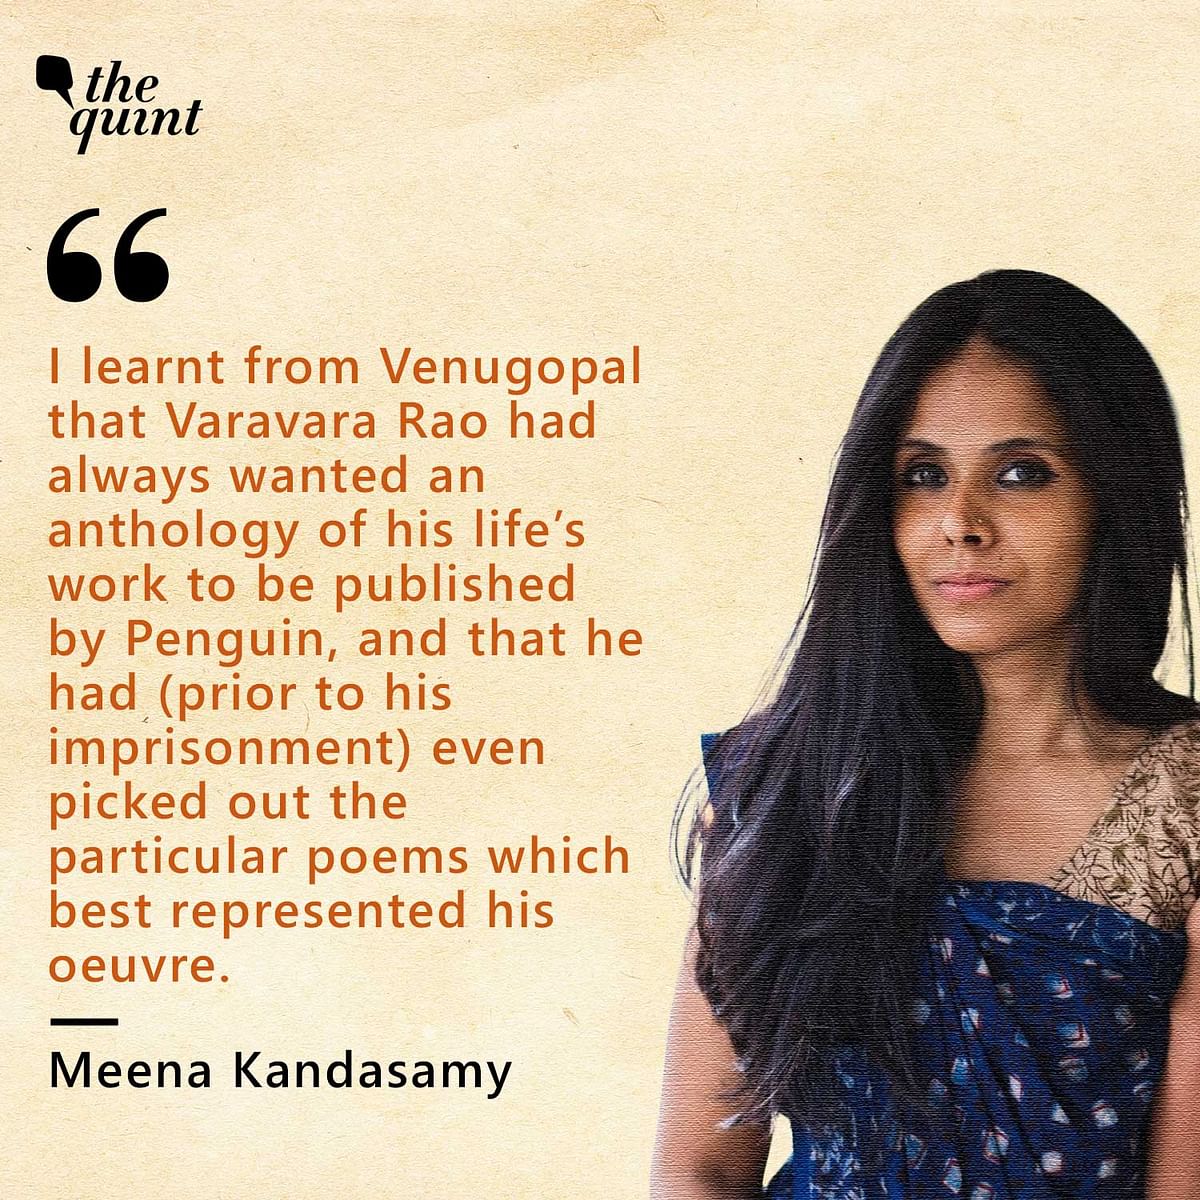 Meena Kandasamy, an editor of Varavara Rao's book, says climate of fear among publishers is real in India.